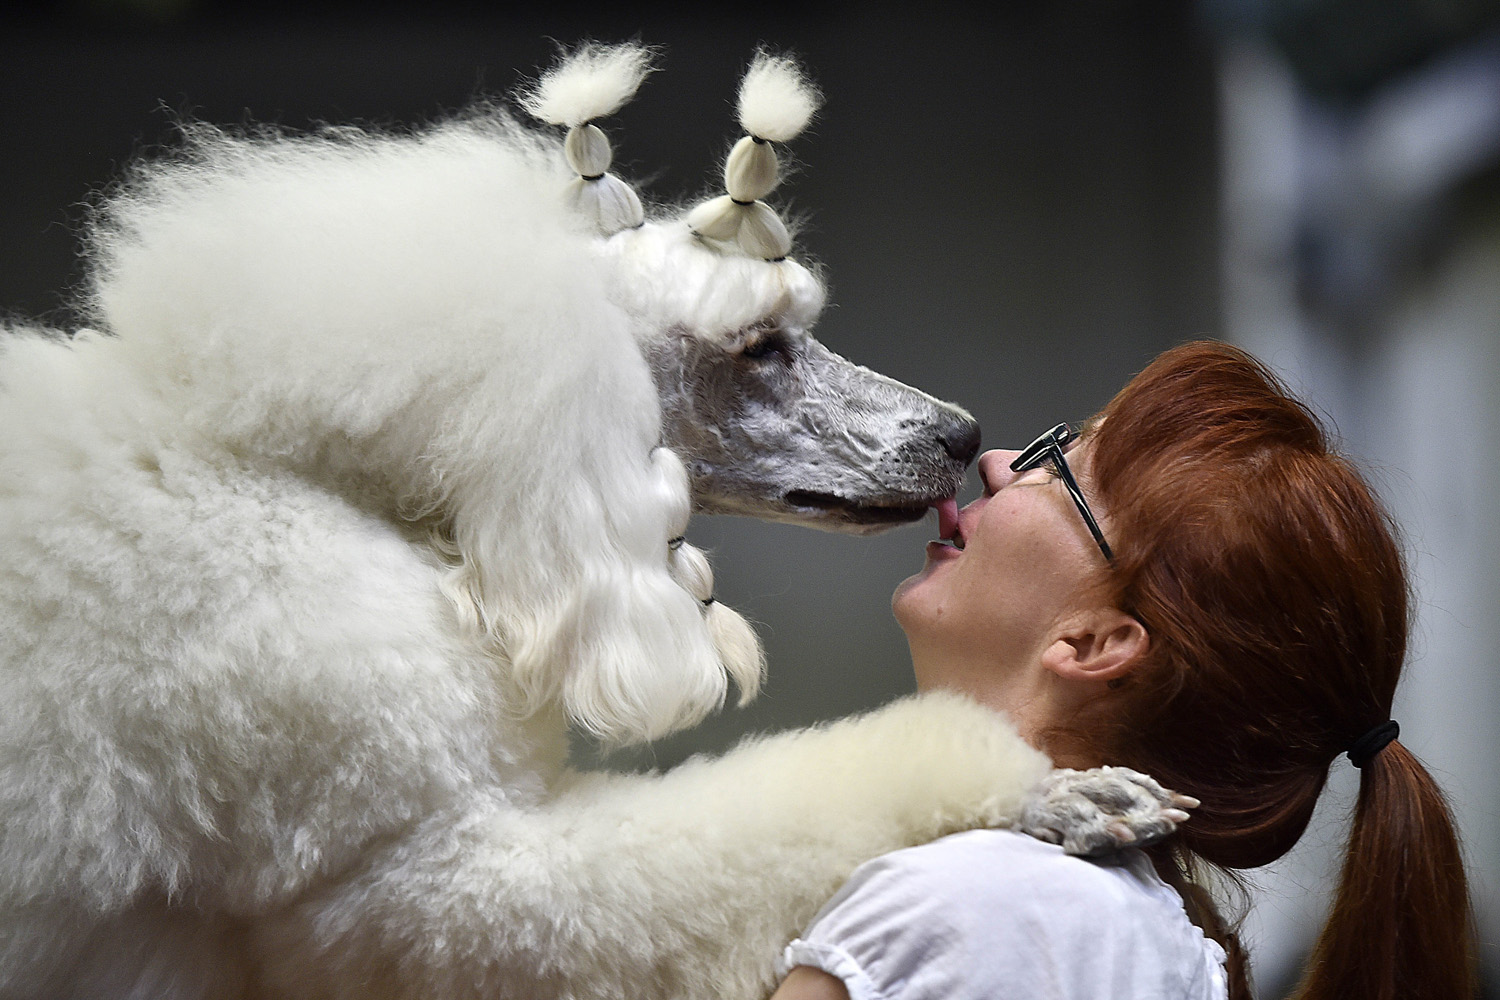 Poodle Farinelli gives back a kiss to its owner Anja Trinks before the contest at the dog show in Dortmund, Germany, on May 9, 2014.